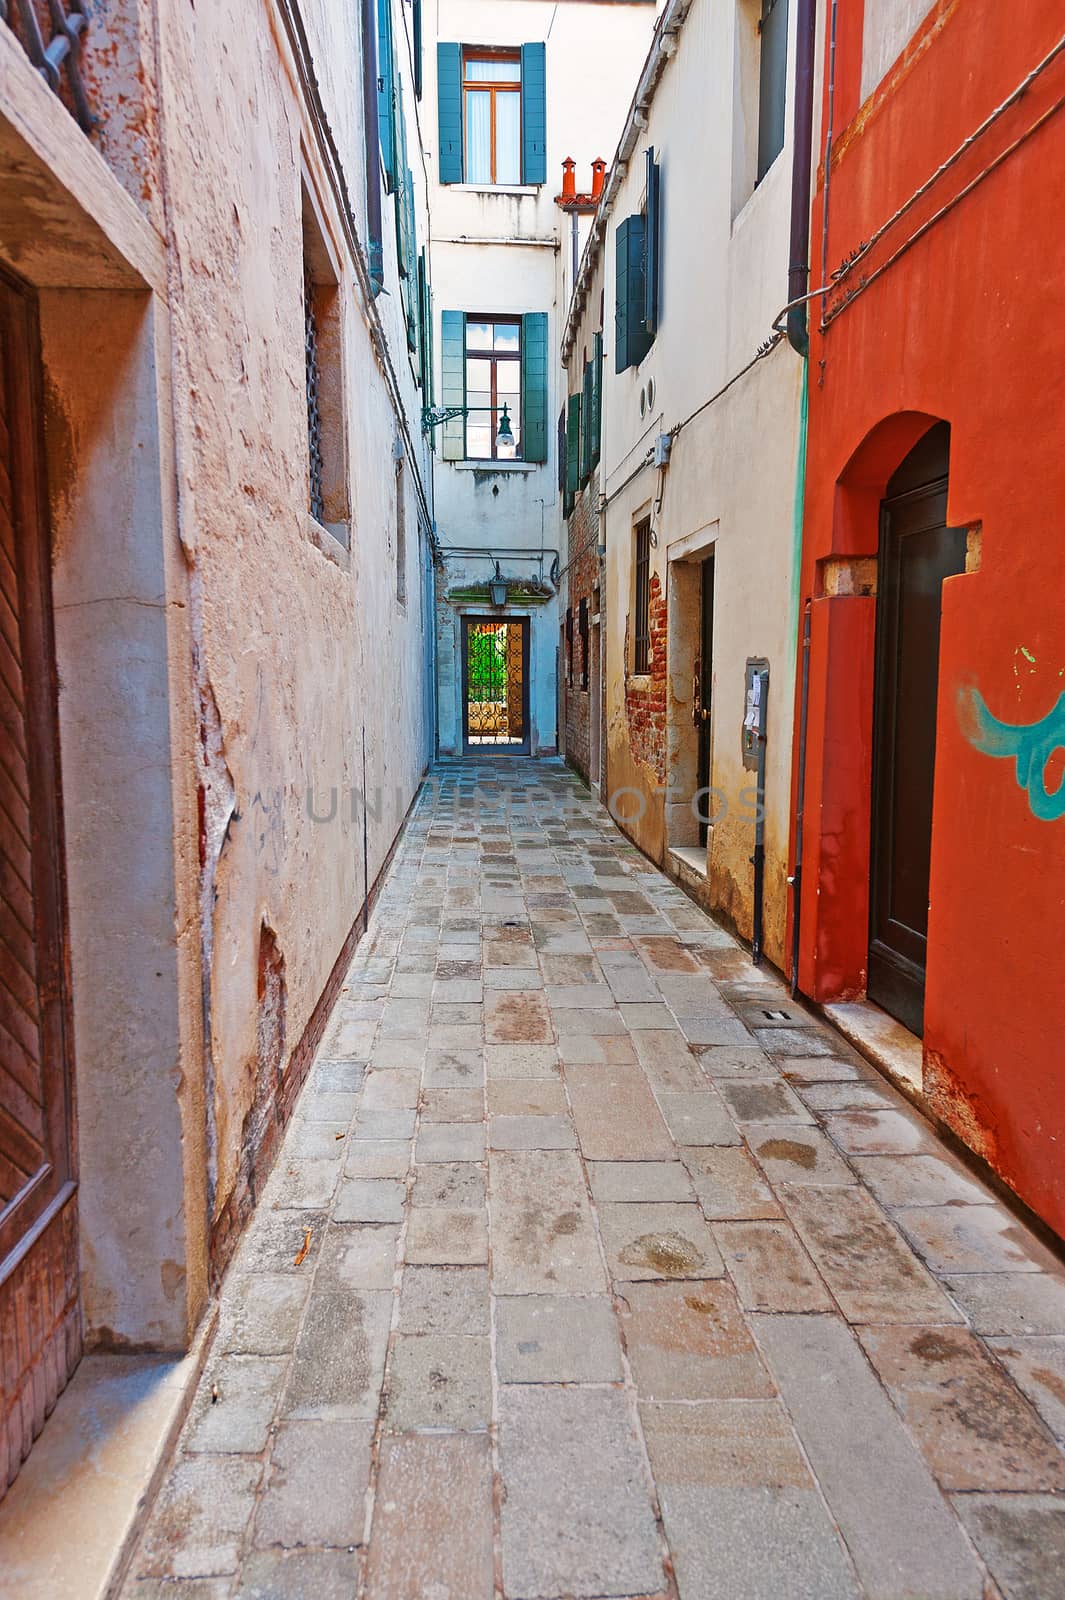 Narrow Alley with Old Buildings in Italian City of Venice